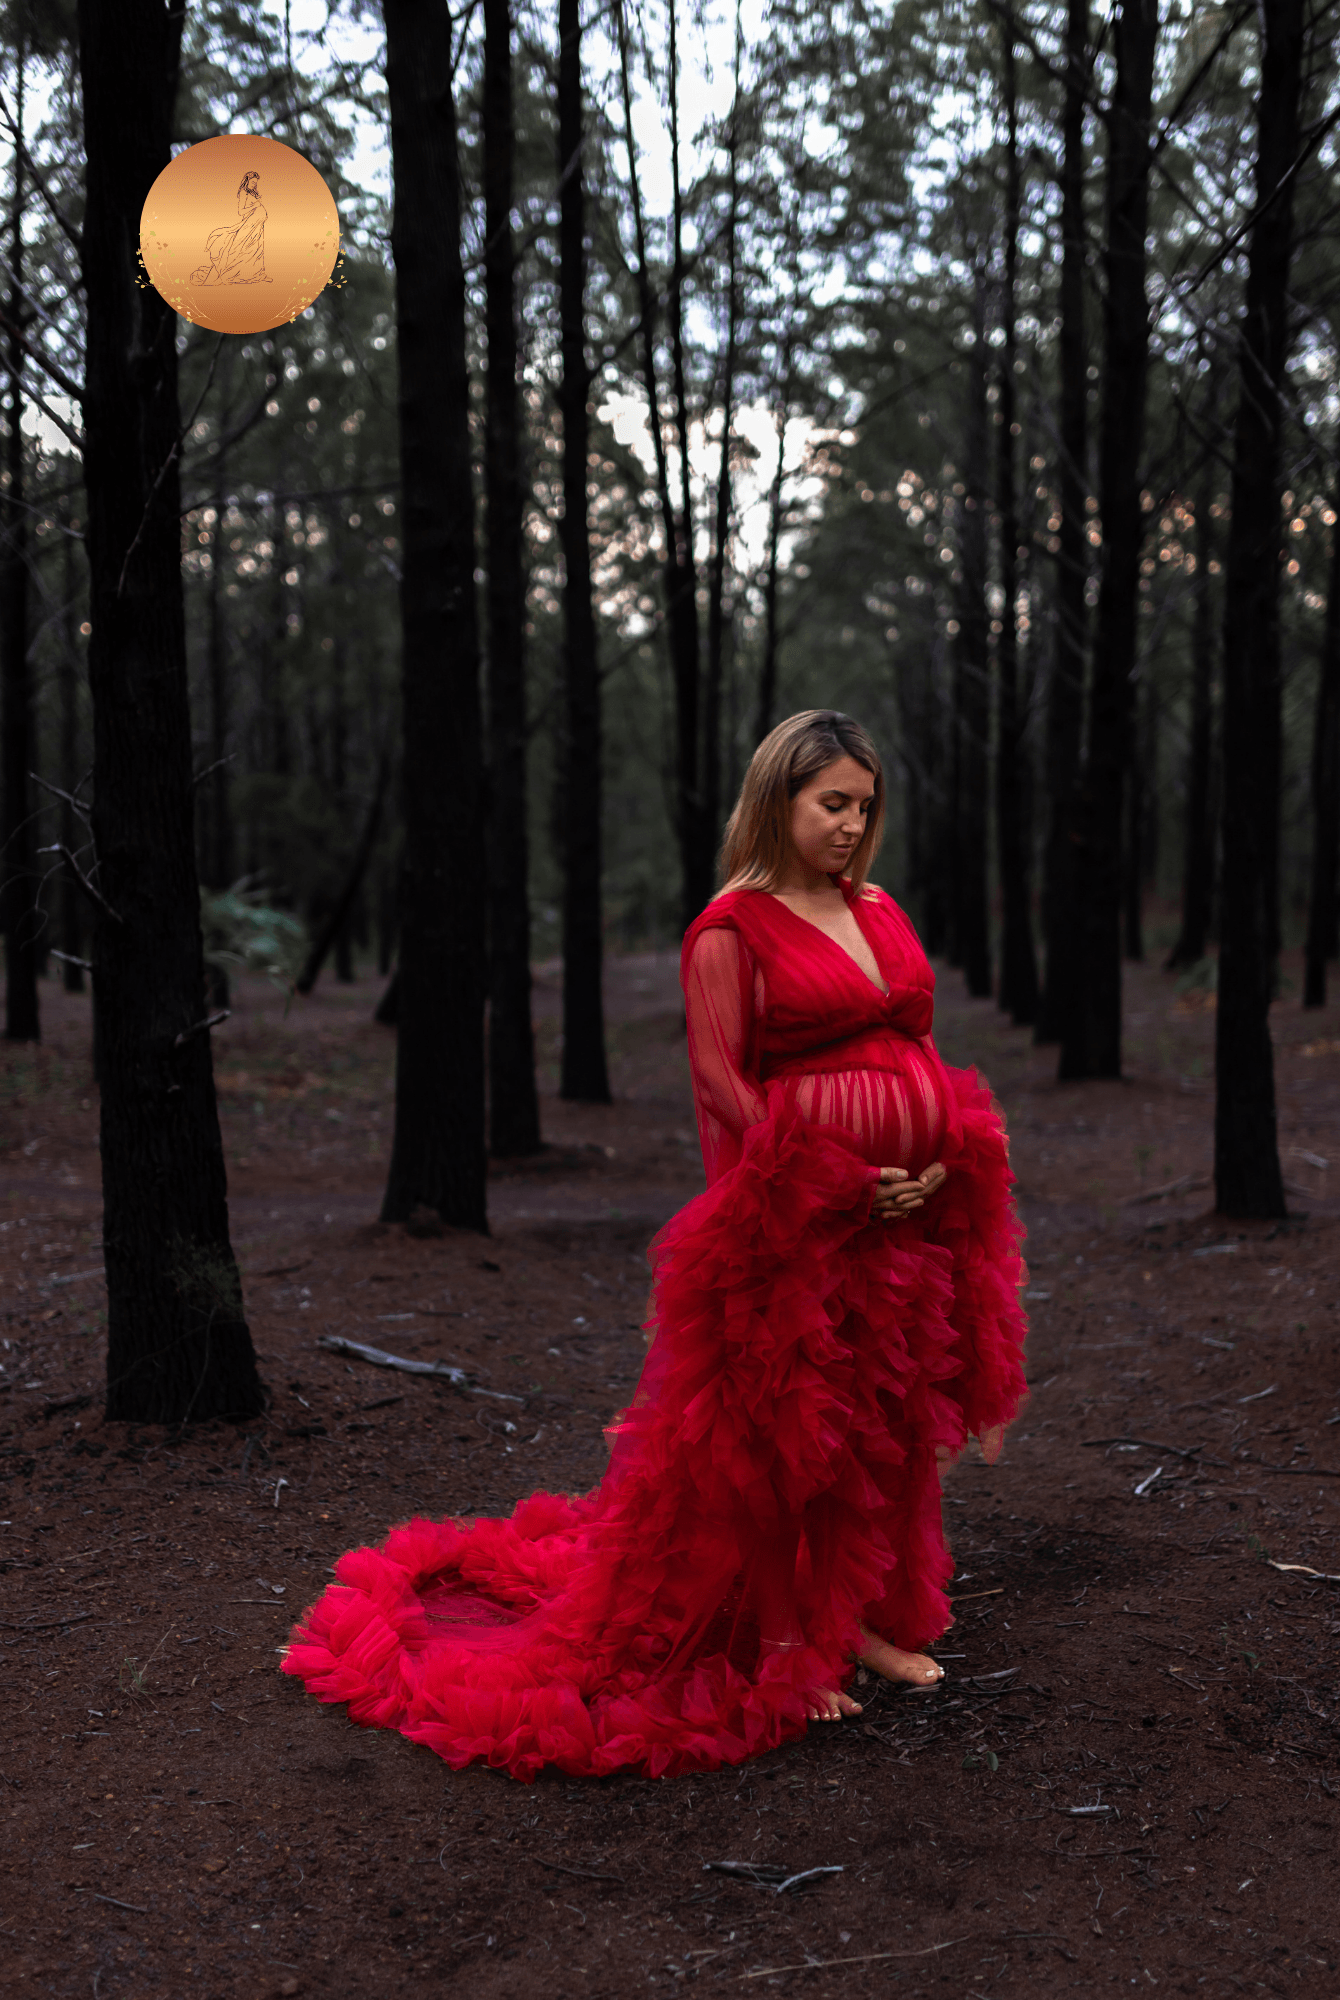 Dress Hire - Maternity Photoshoot Dresses - Ari - Red Tulle Robe - 4 DAY RENTAL - Luxe Bumps AU